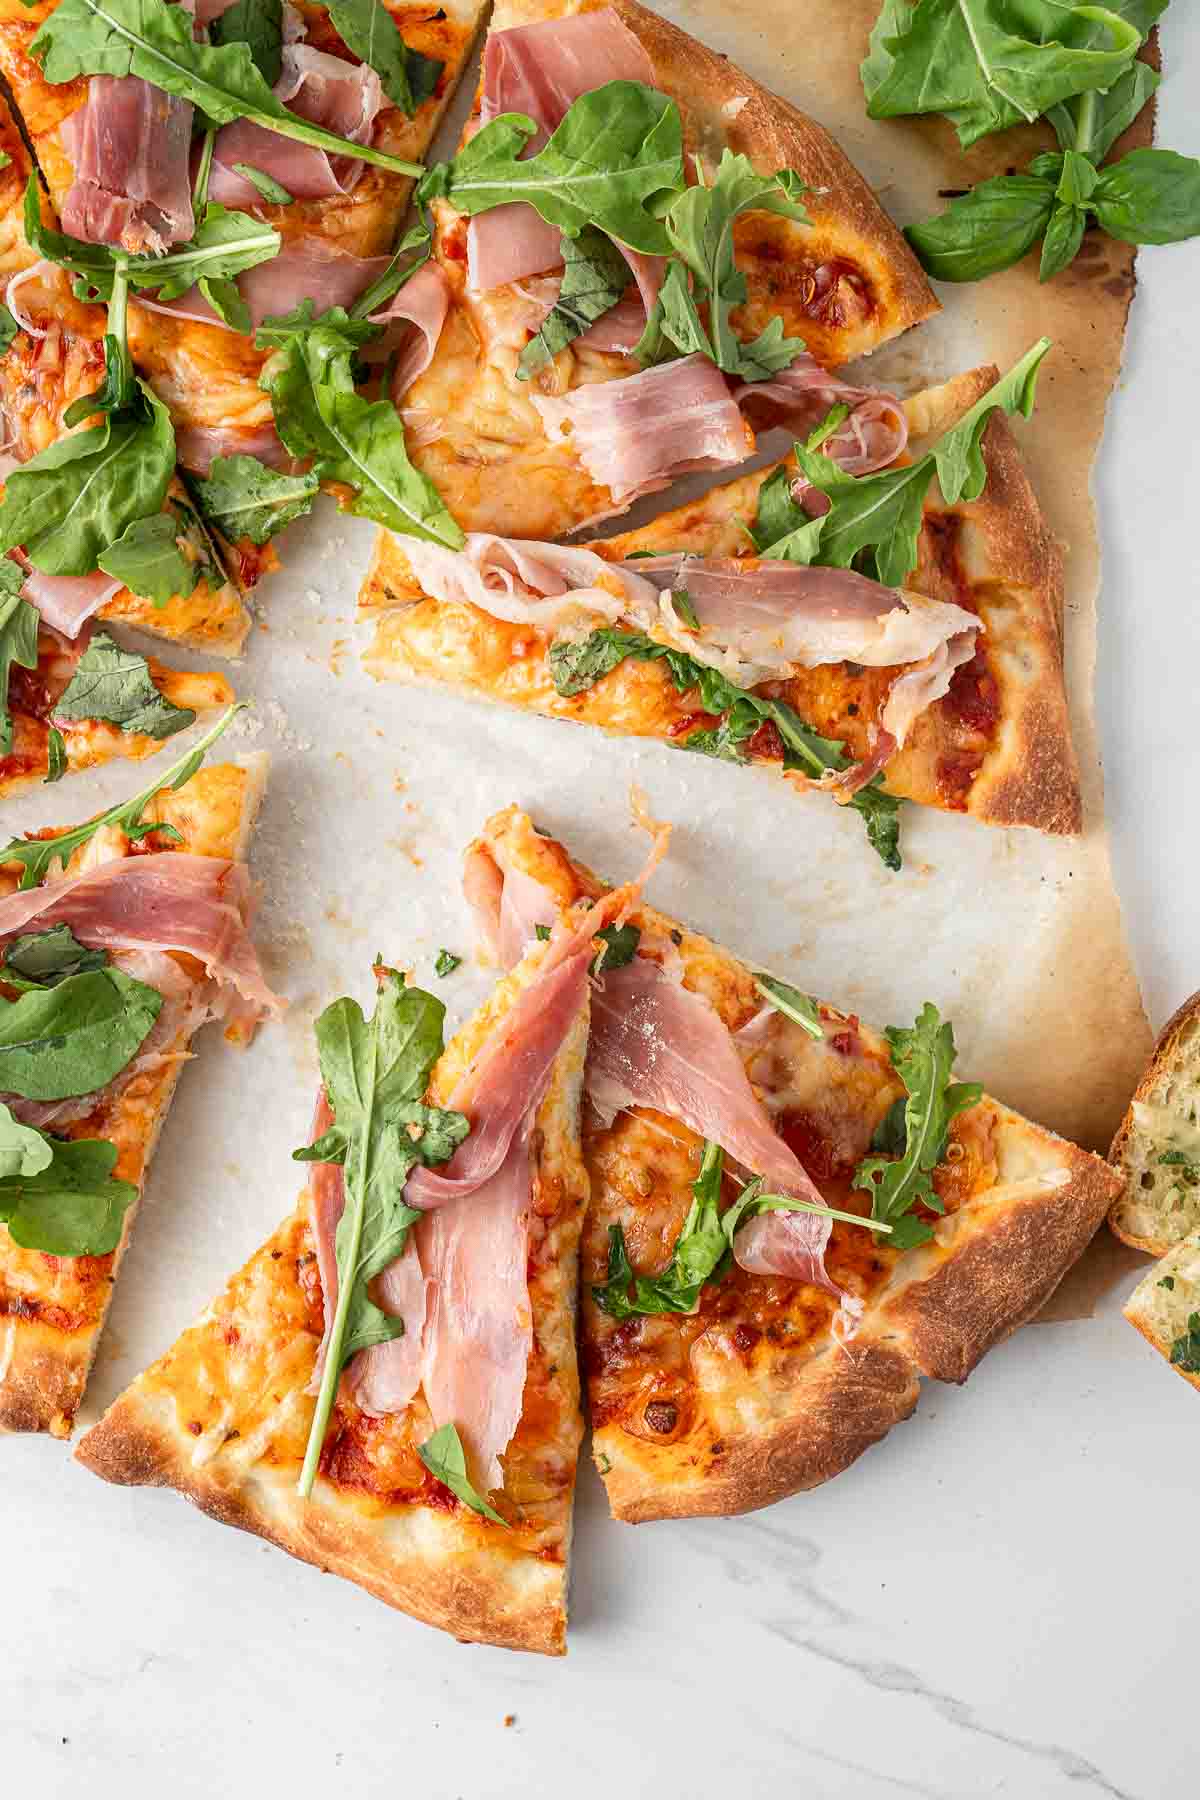 Prosciutto pizza with rocket and basil cut into slices.